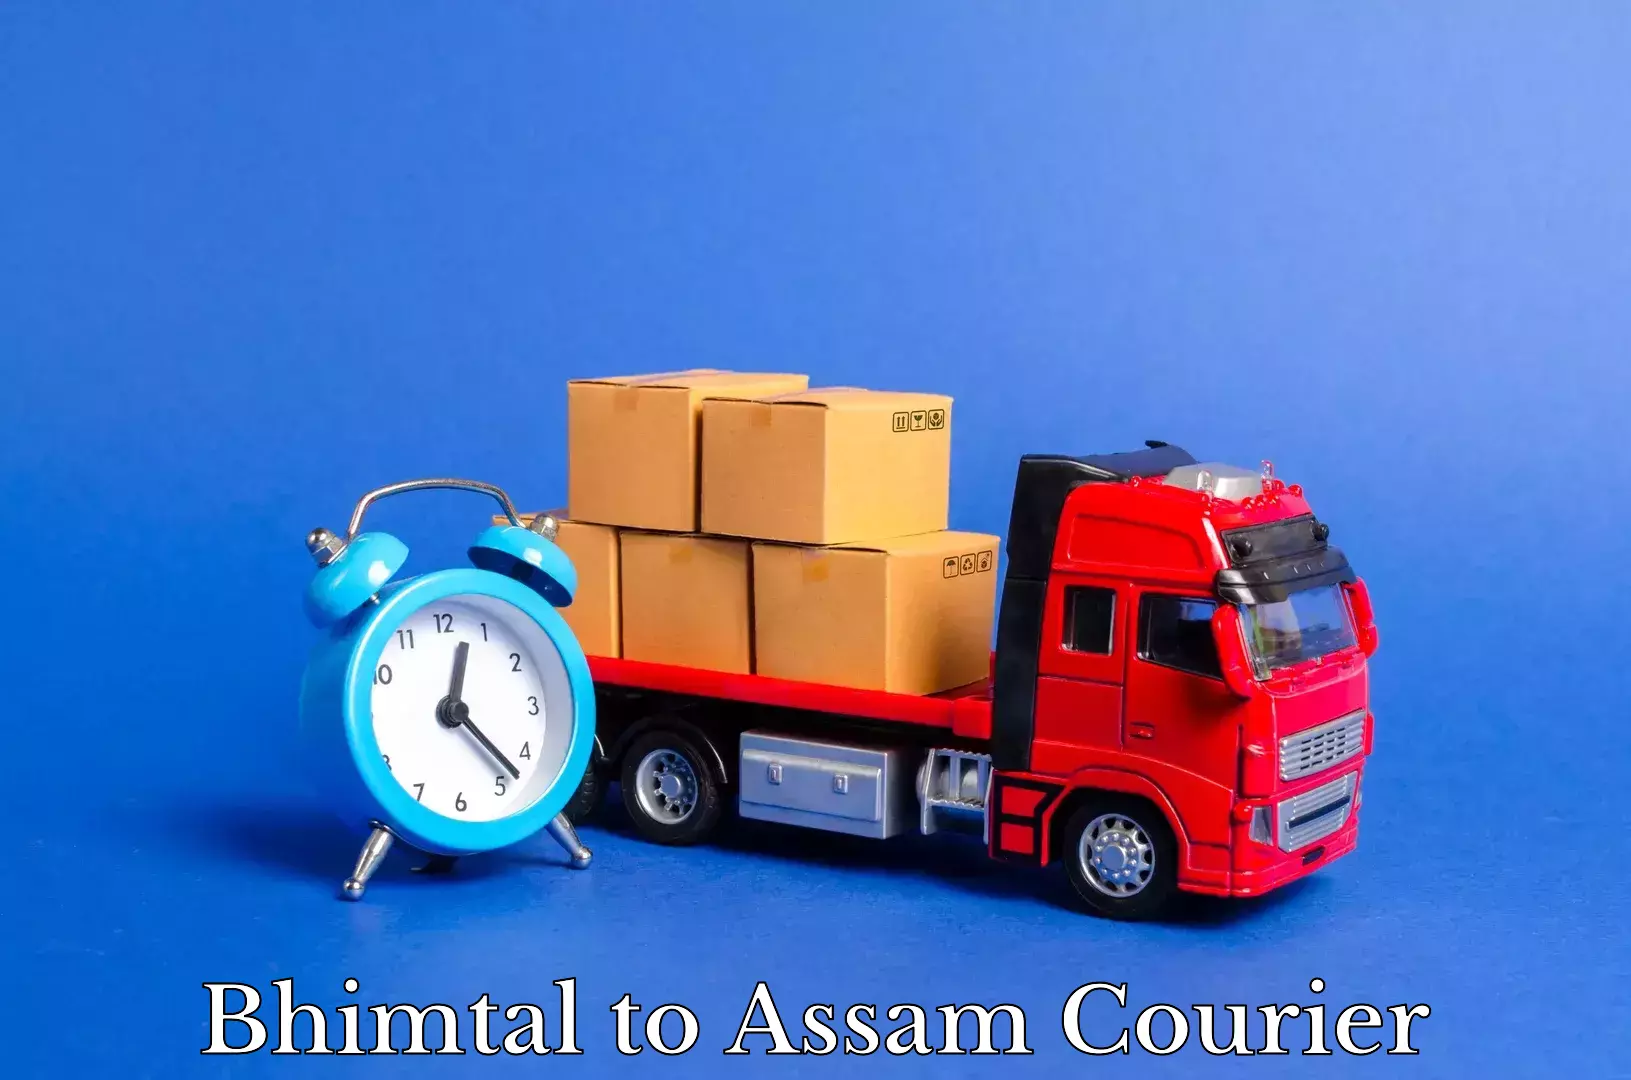 Professional moving company in Bhimtal to Guwahati